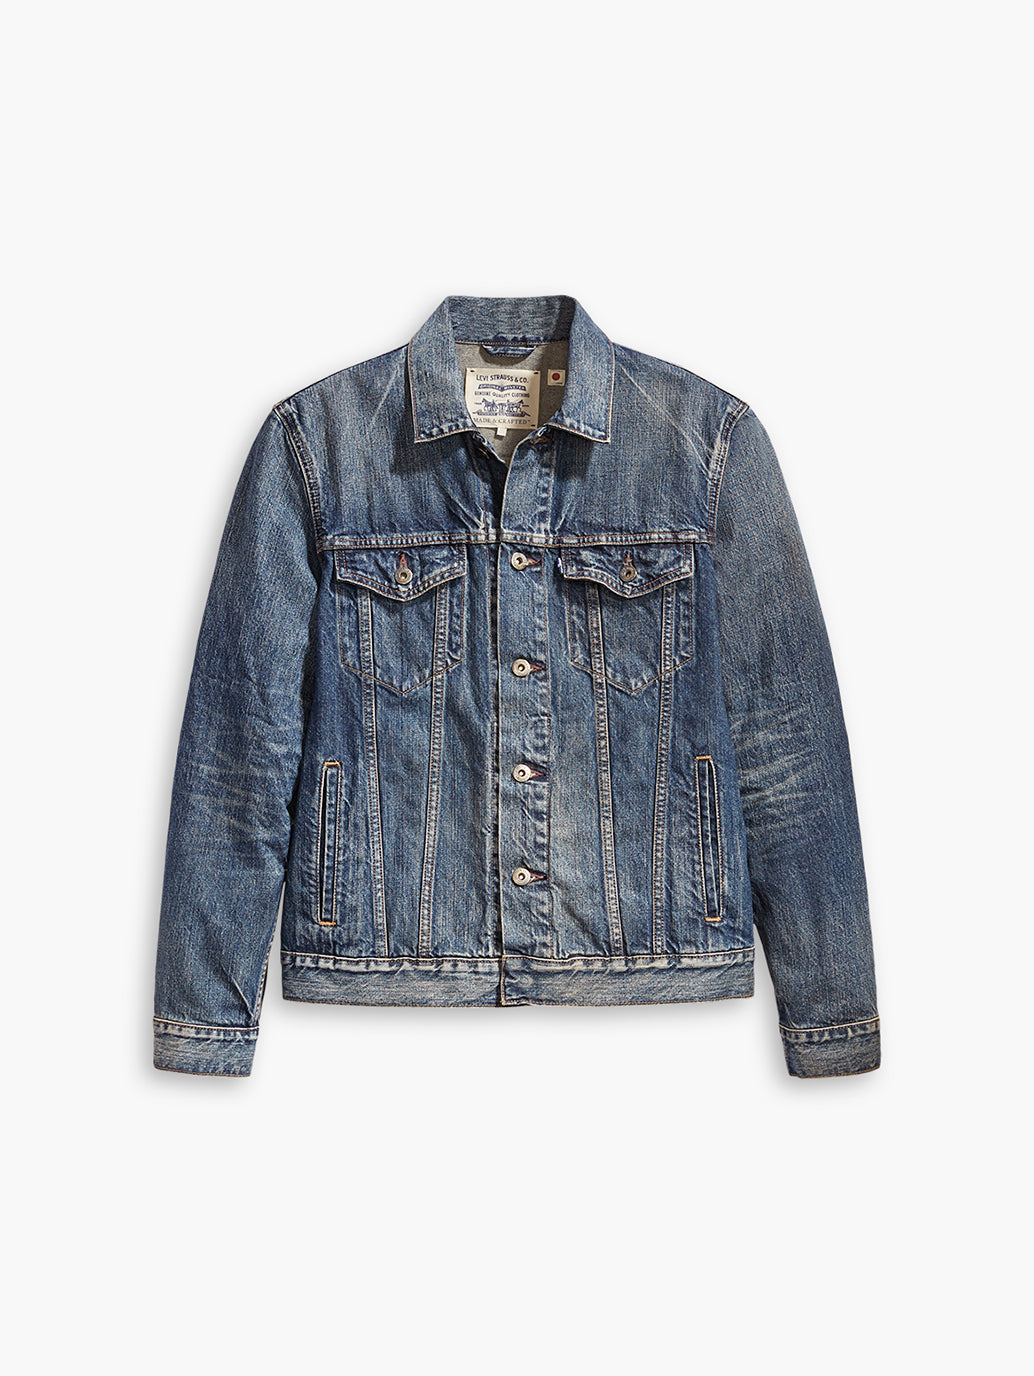 Levi's® Made & Crafted® Type iii Trucker Jacket